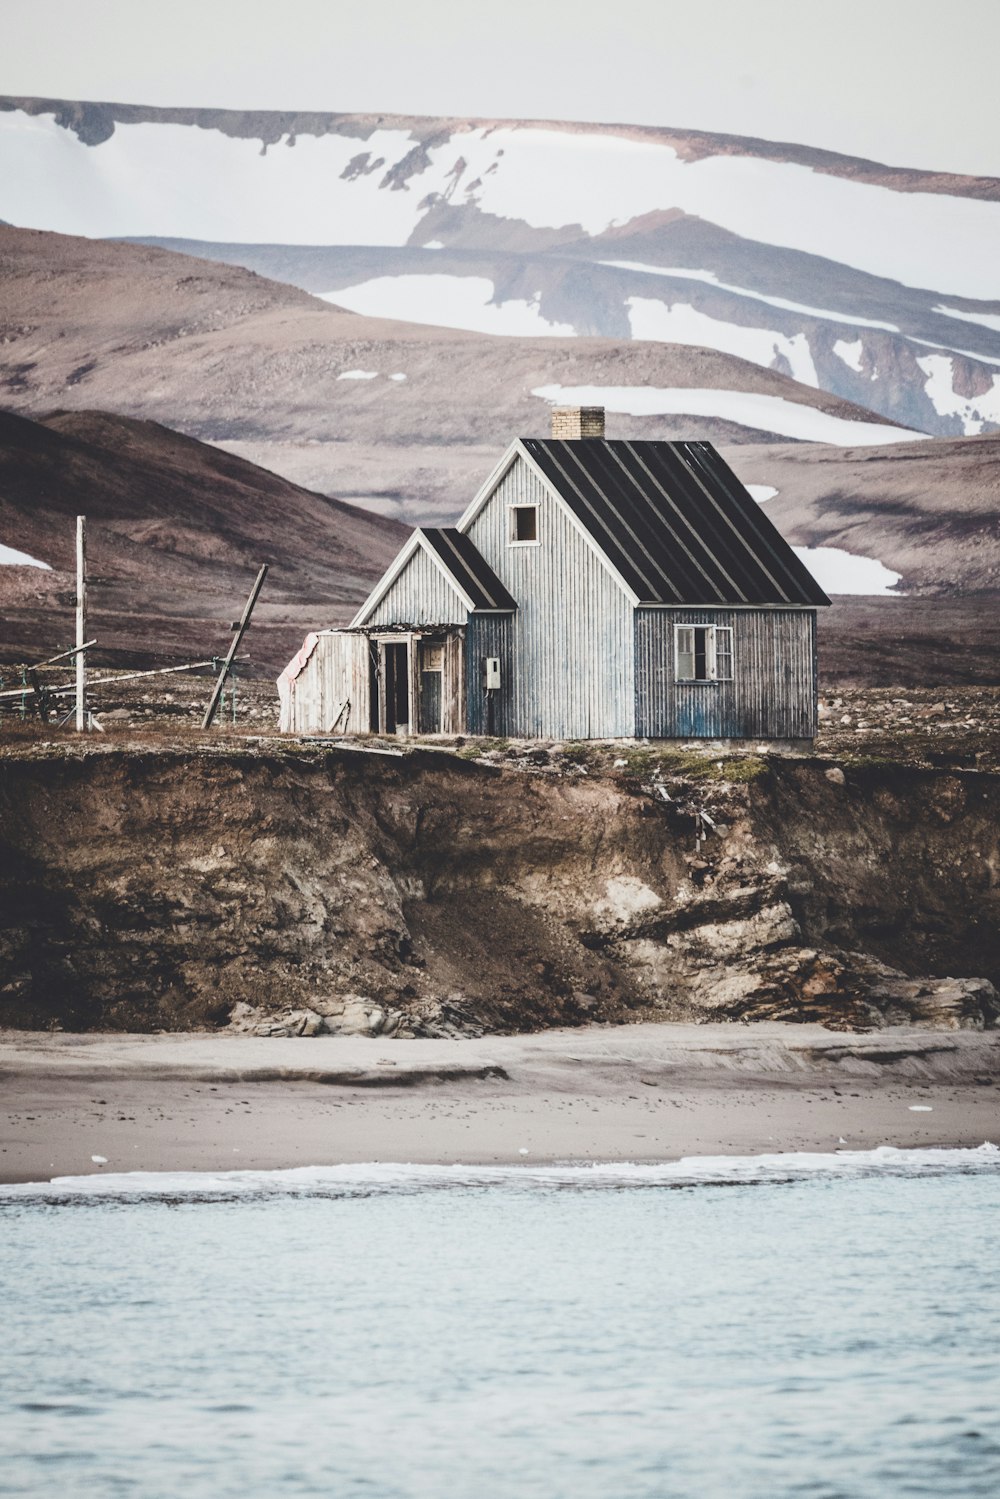 gray wooden house on land near body of water